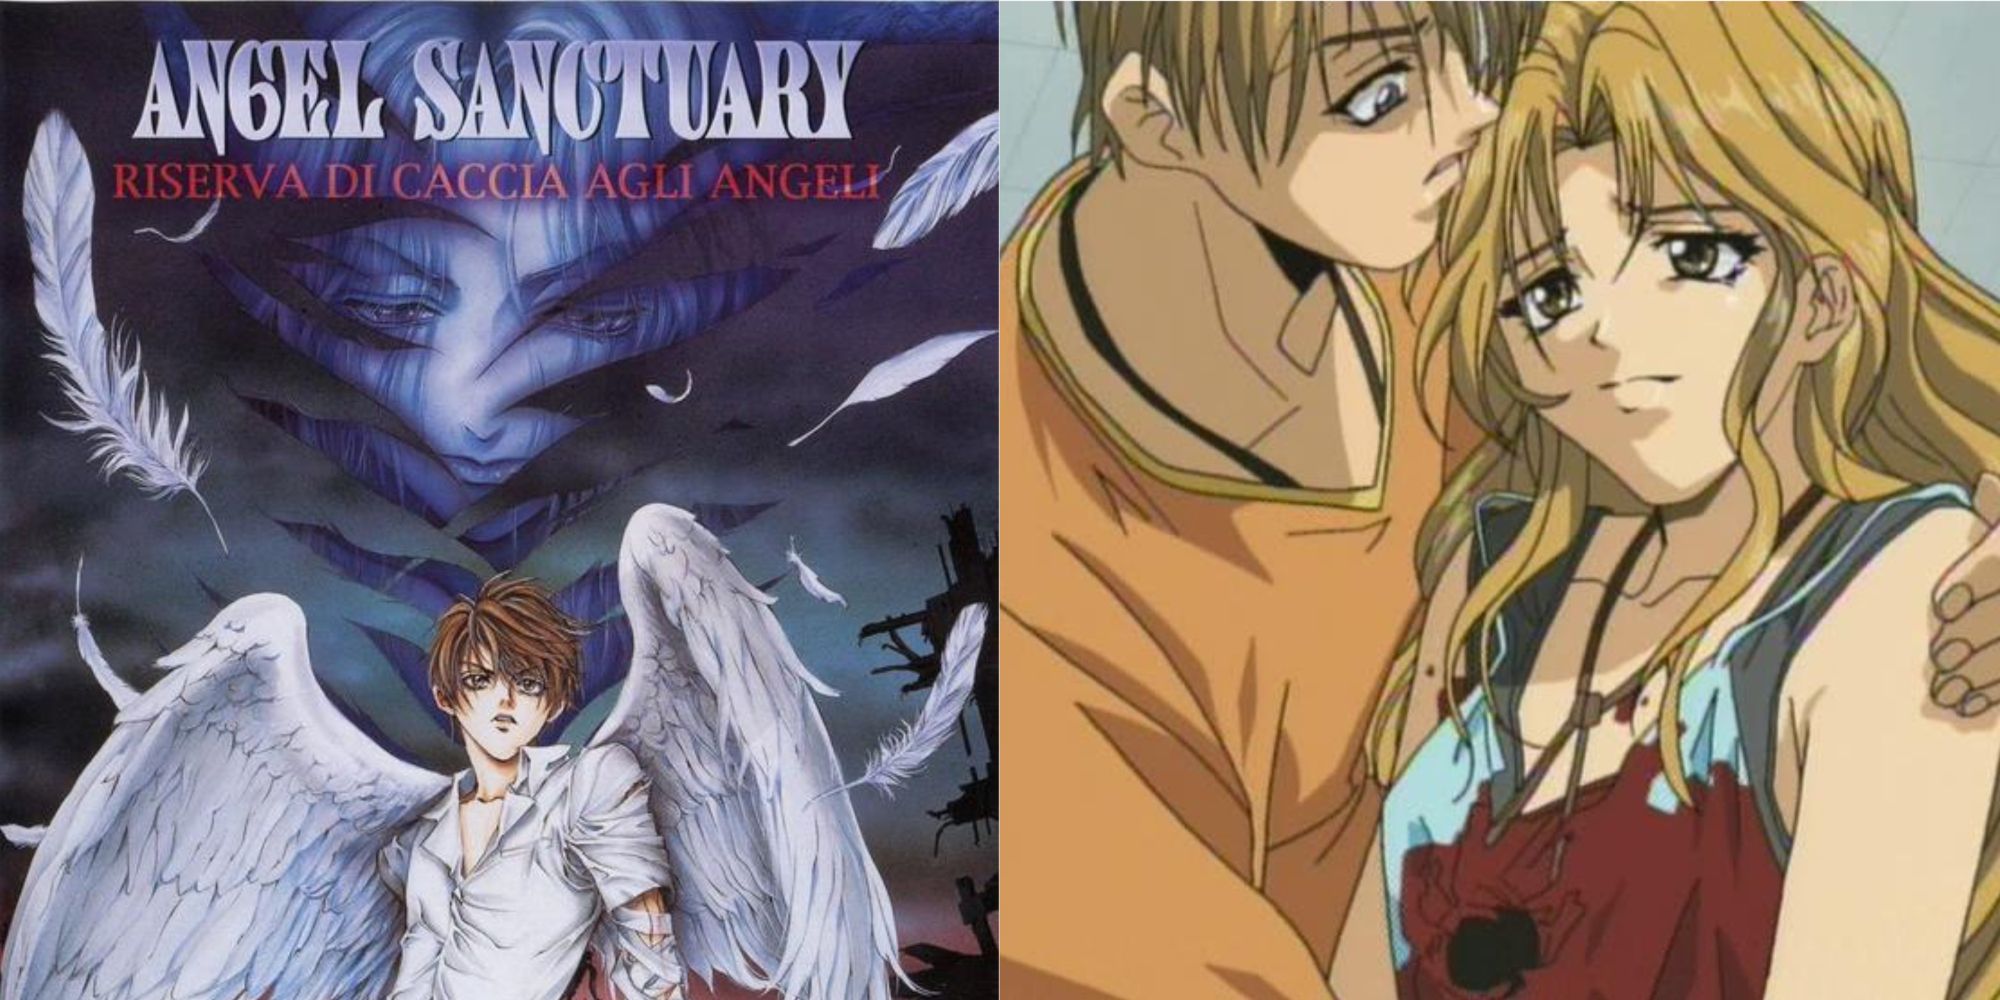 Characters of the Angelic Sanctuary